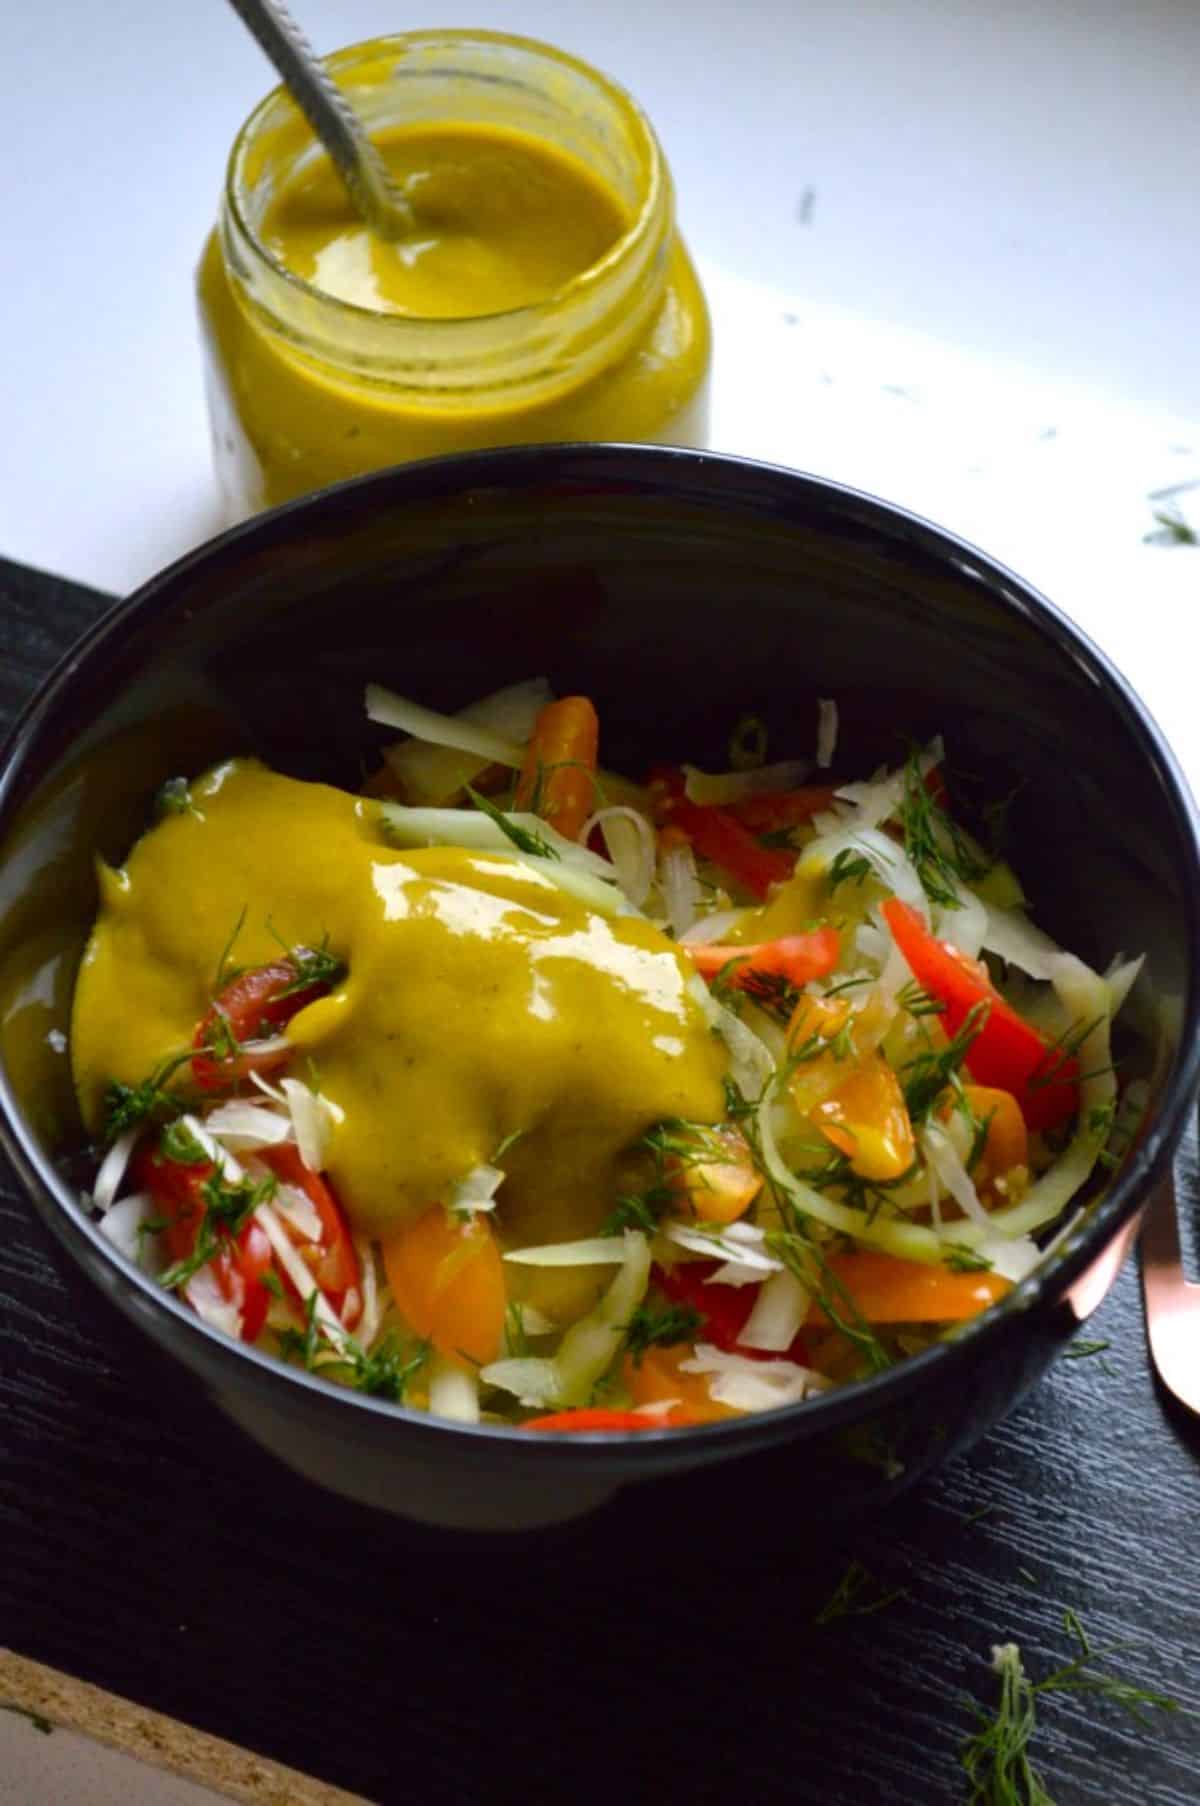 Vegan Green Papaya Salad in a black bowl drizzled with a spicy mango dressing.